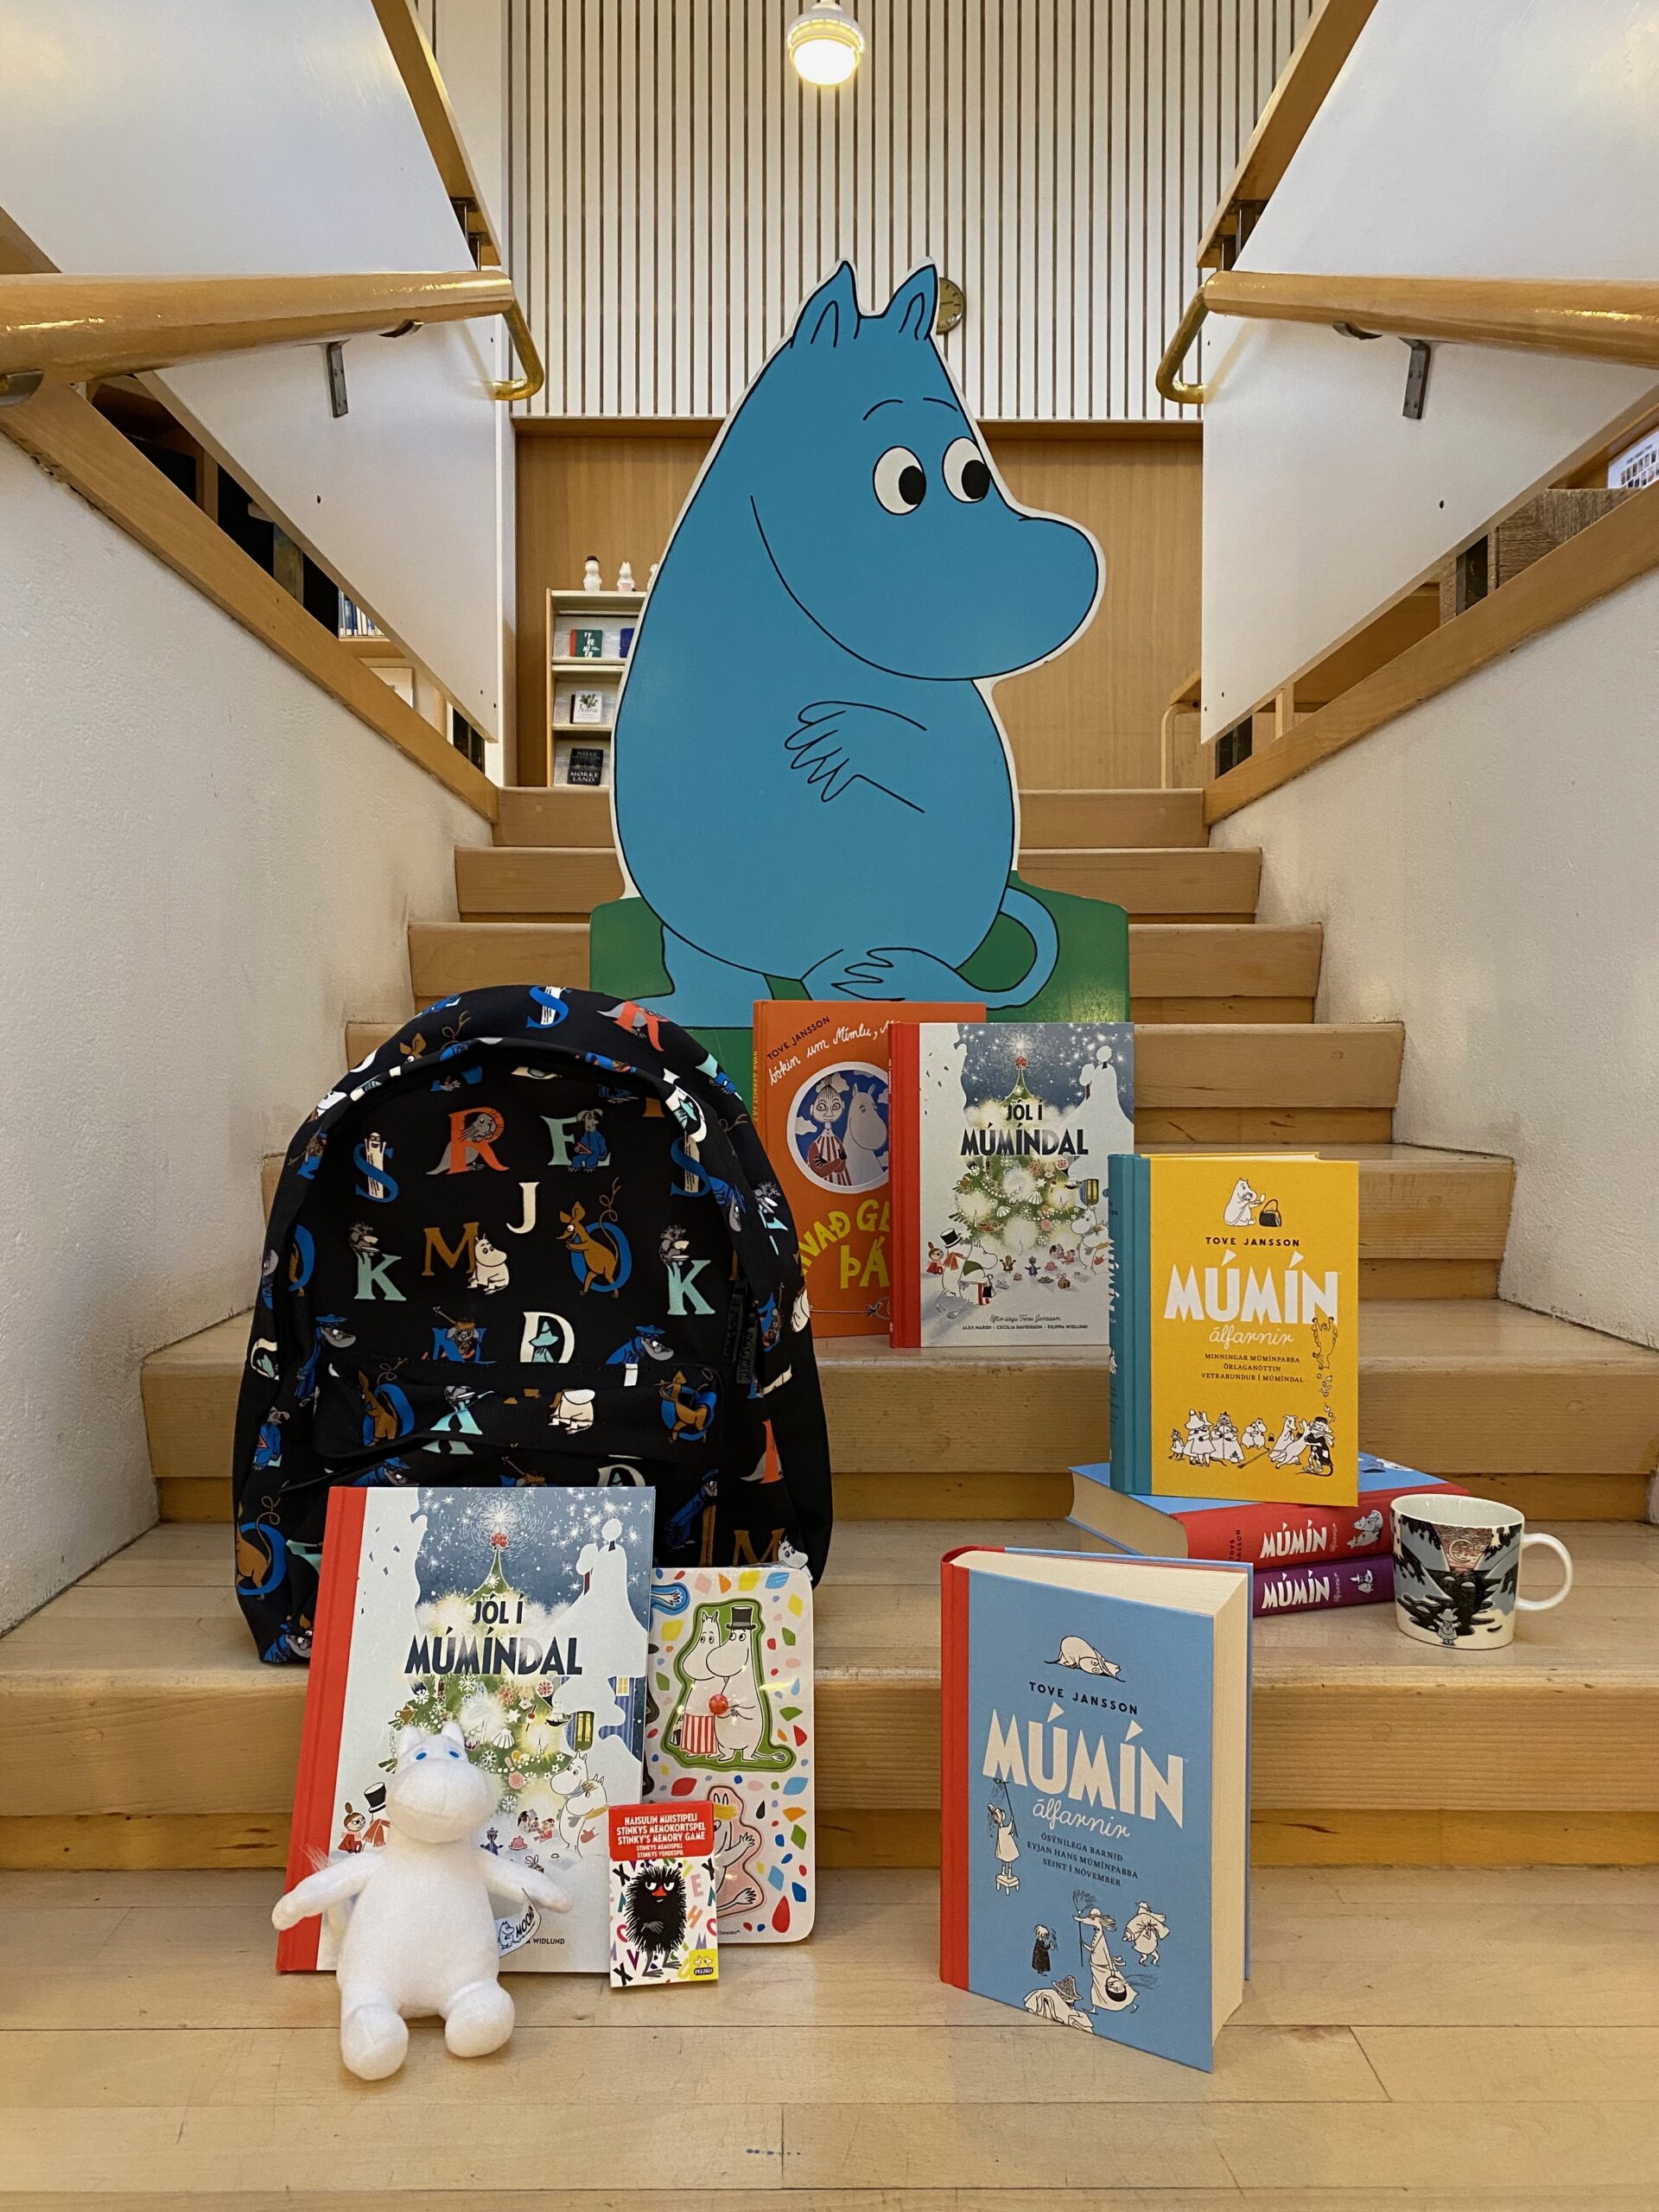 Story competition for children inspired by the Moomins!